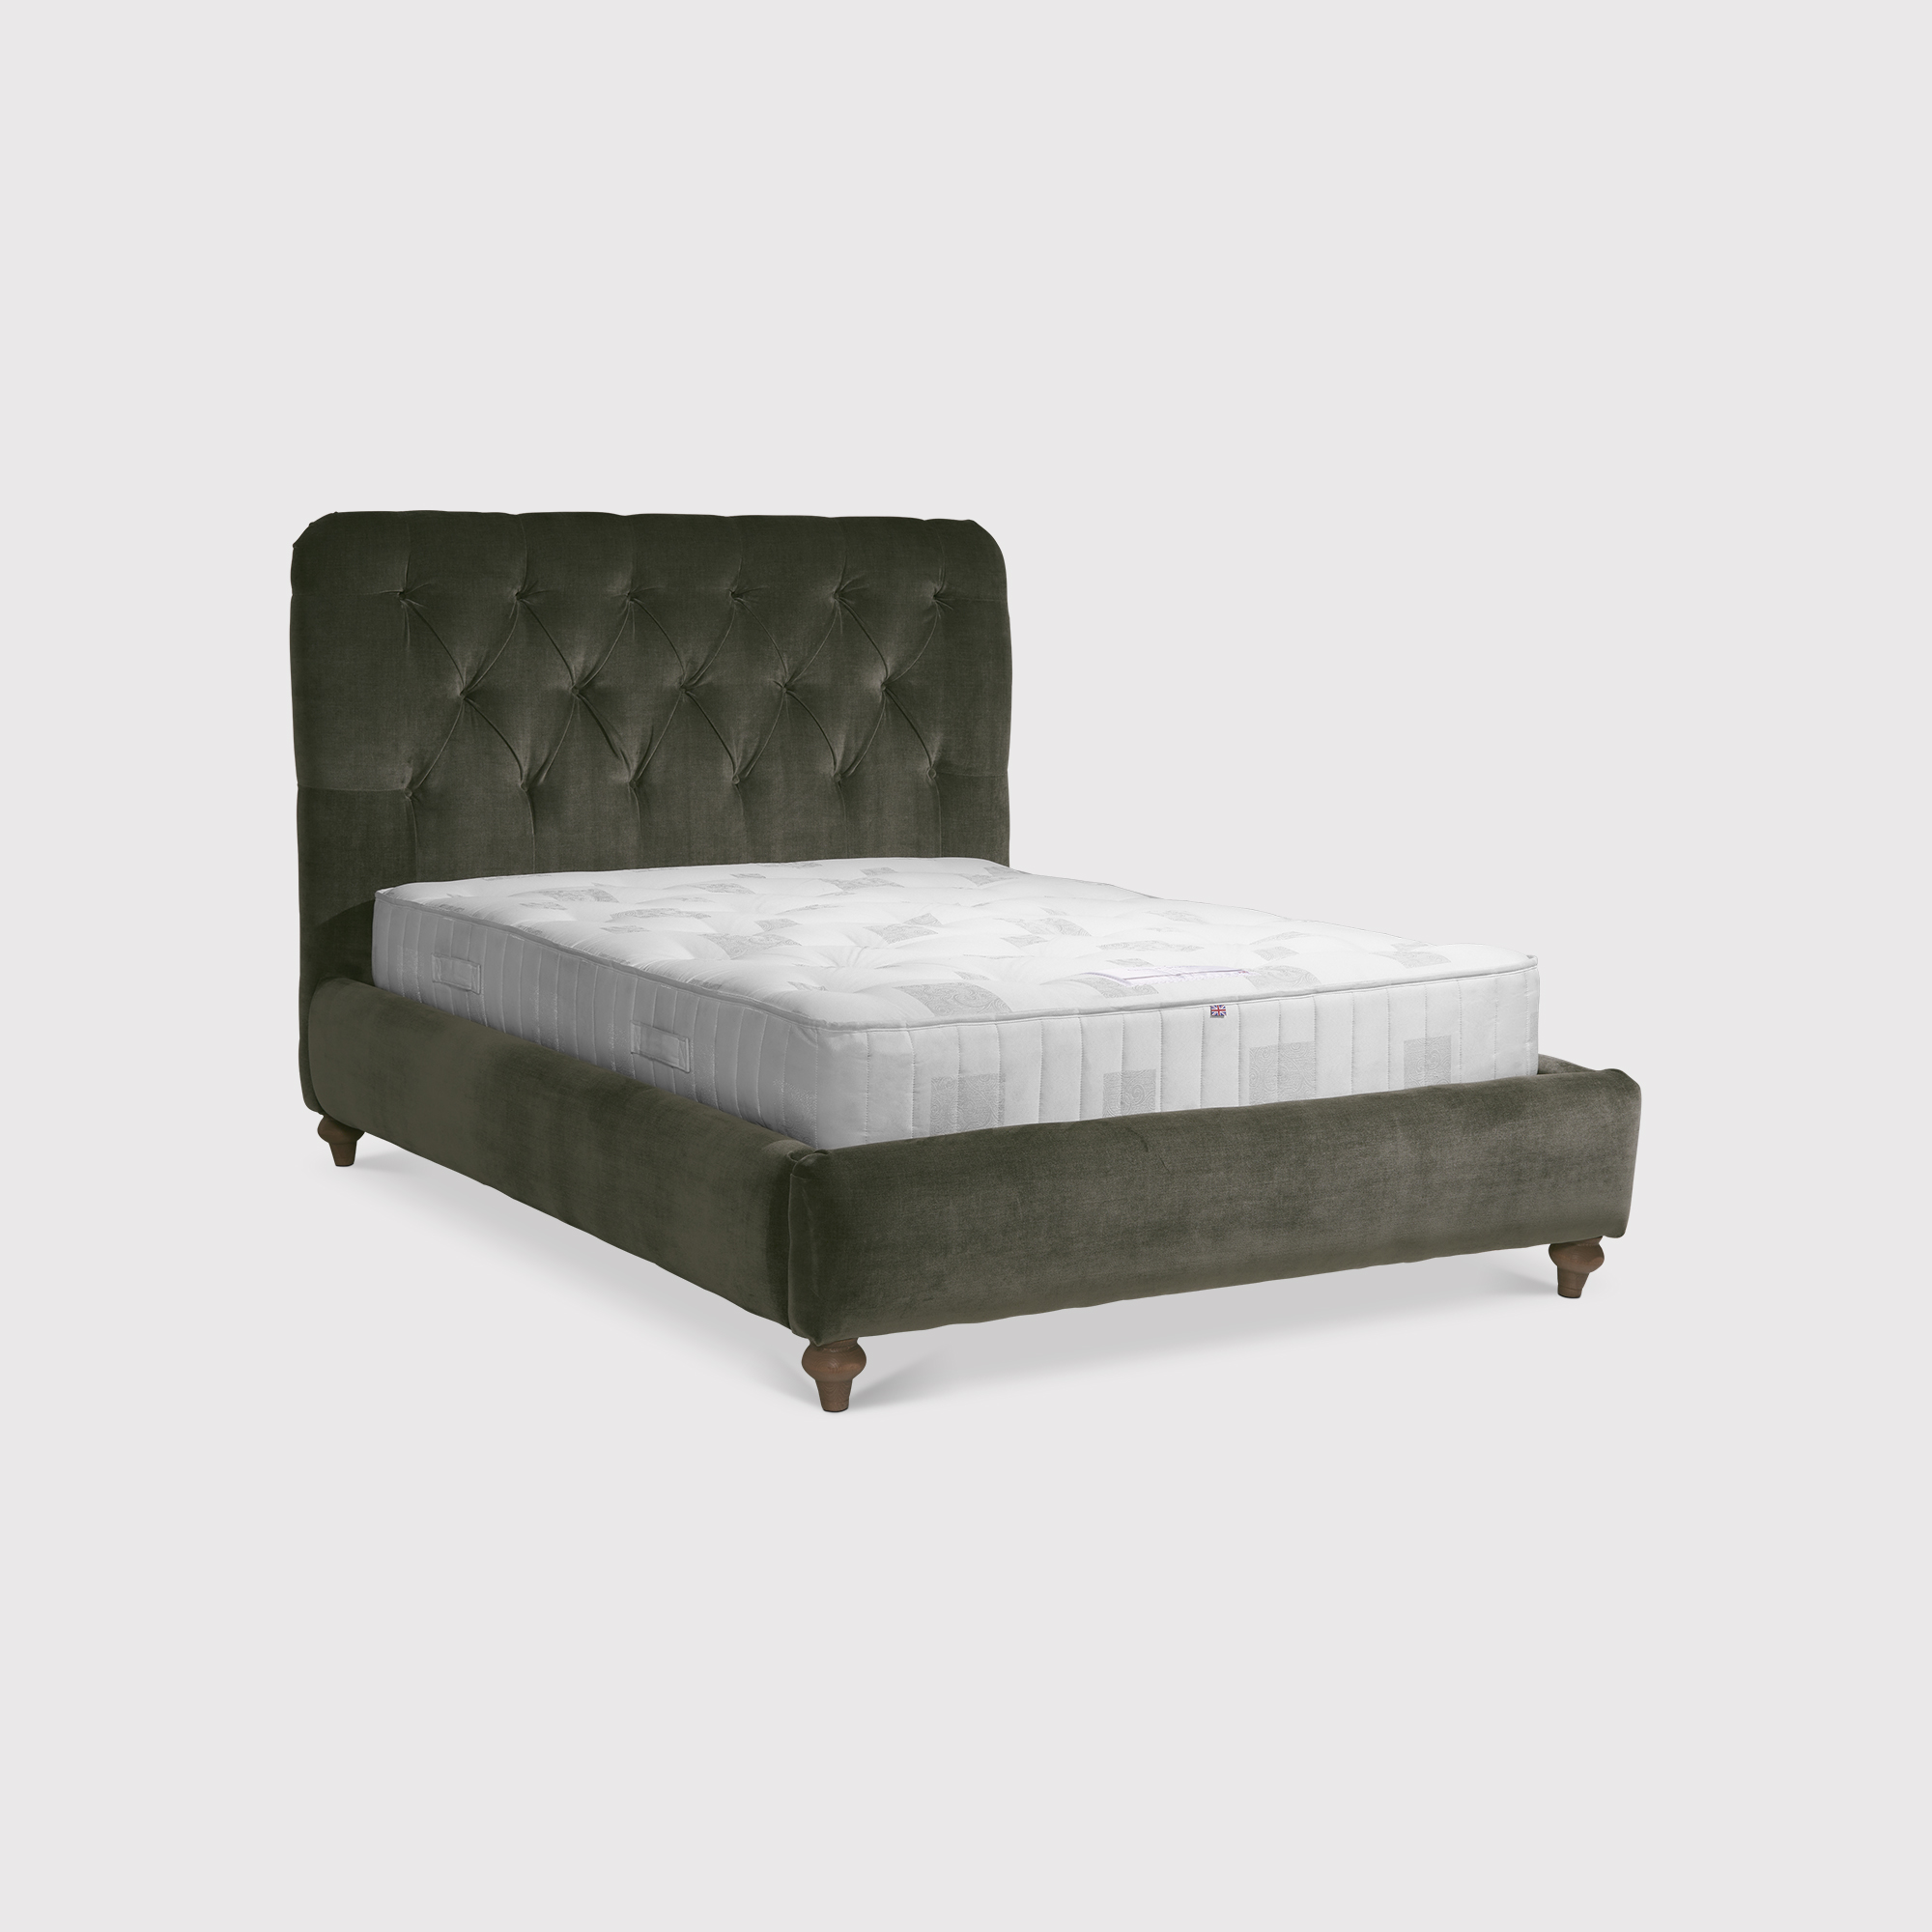 Delphine Double Bed Frame, Green | Barker & Stonehouse